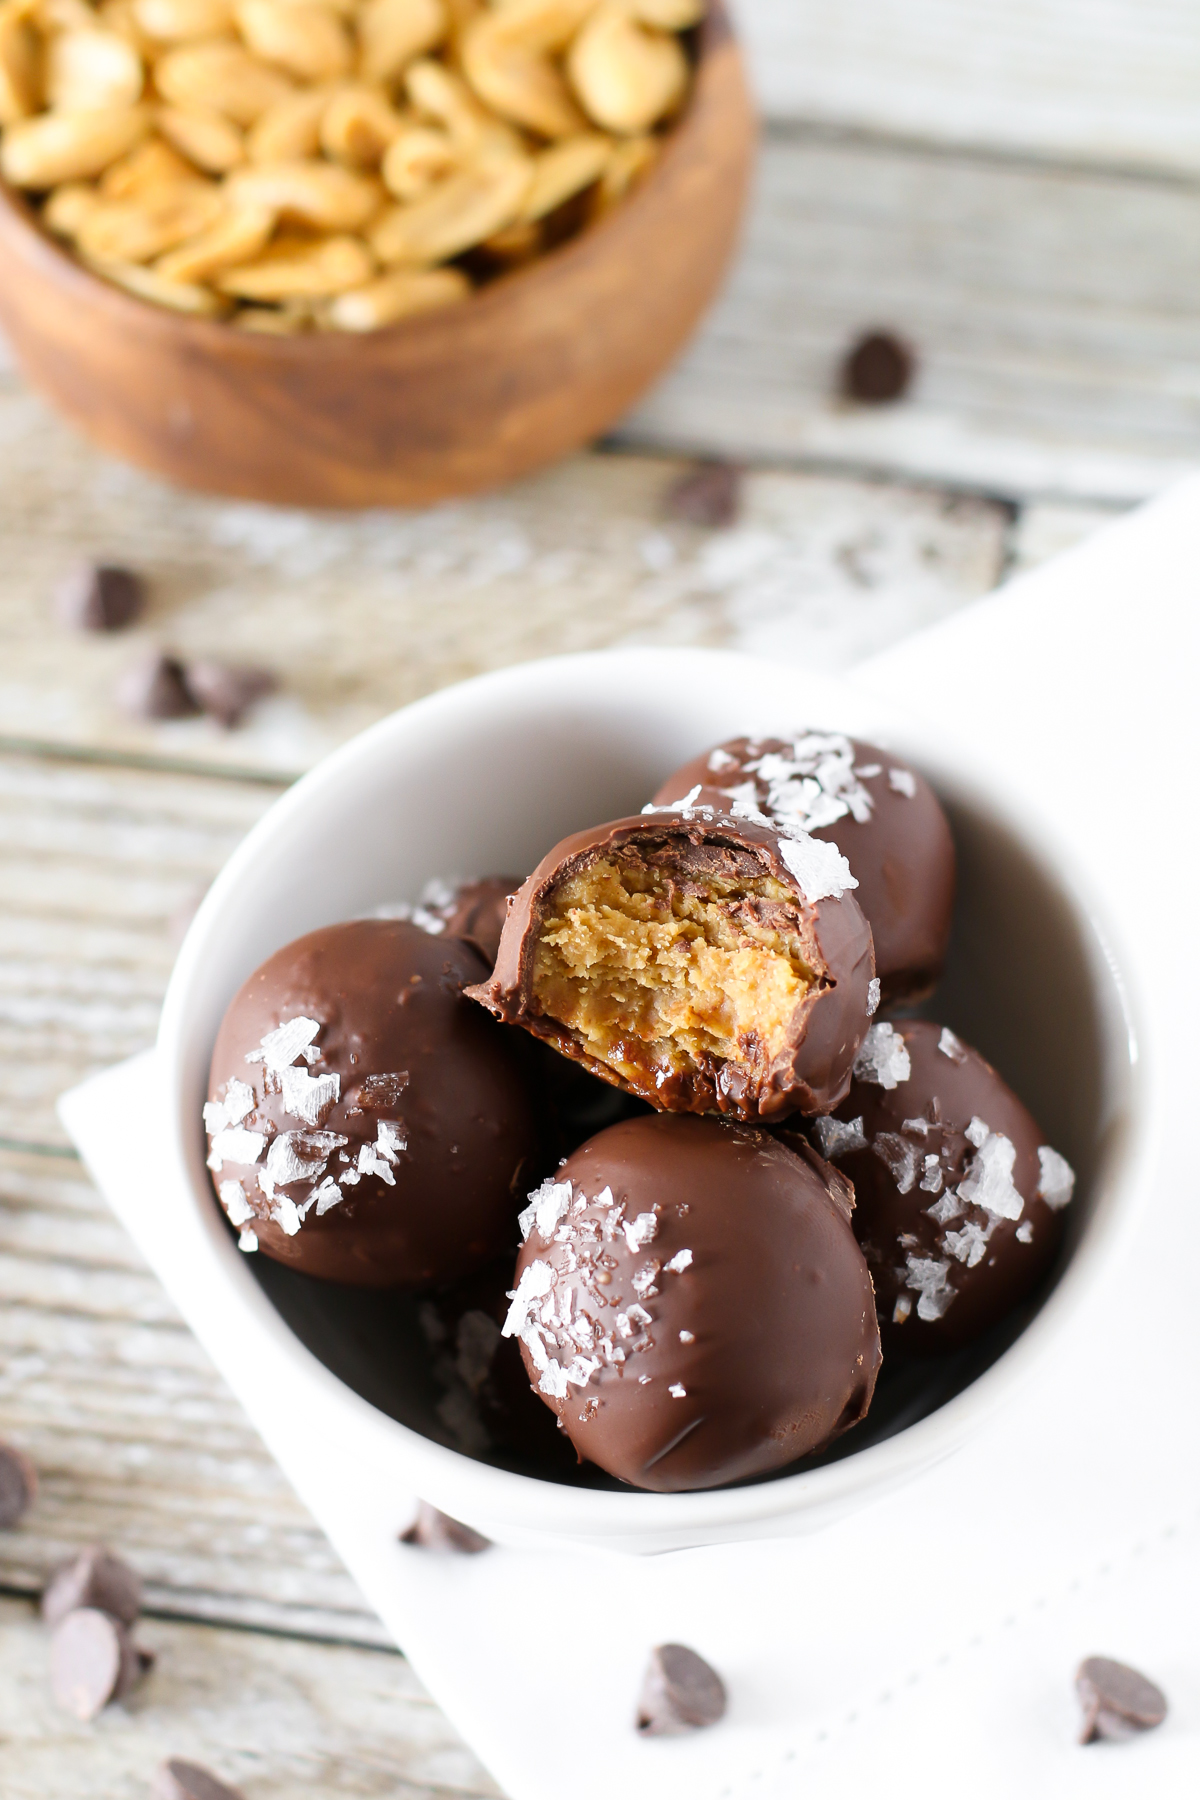 Gluten Free Vegan Salted Chocolate Peanut Butter Truffles. 3-ingredient creamy peanut butter truffles, coated in chocolate and a sprinkling of sea salt flakes. 